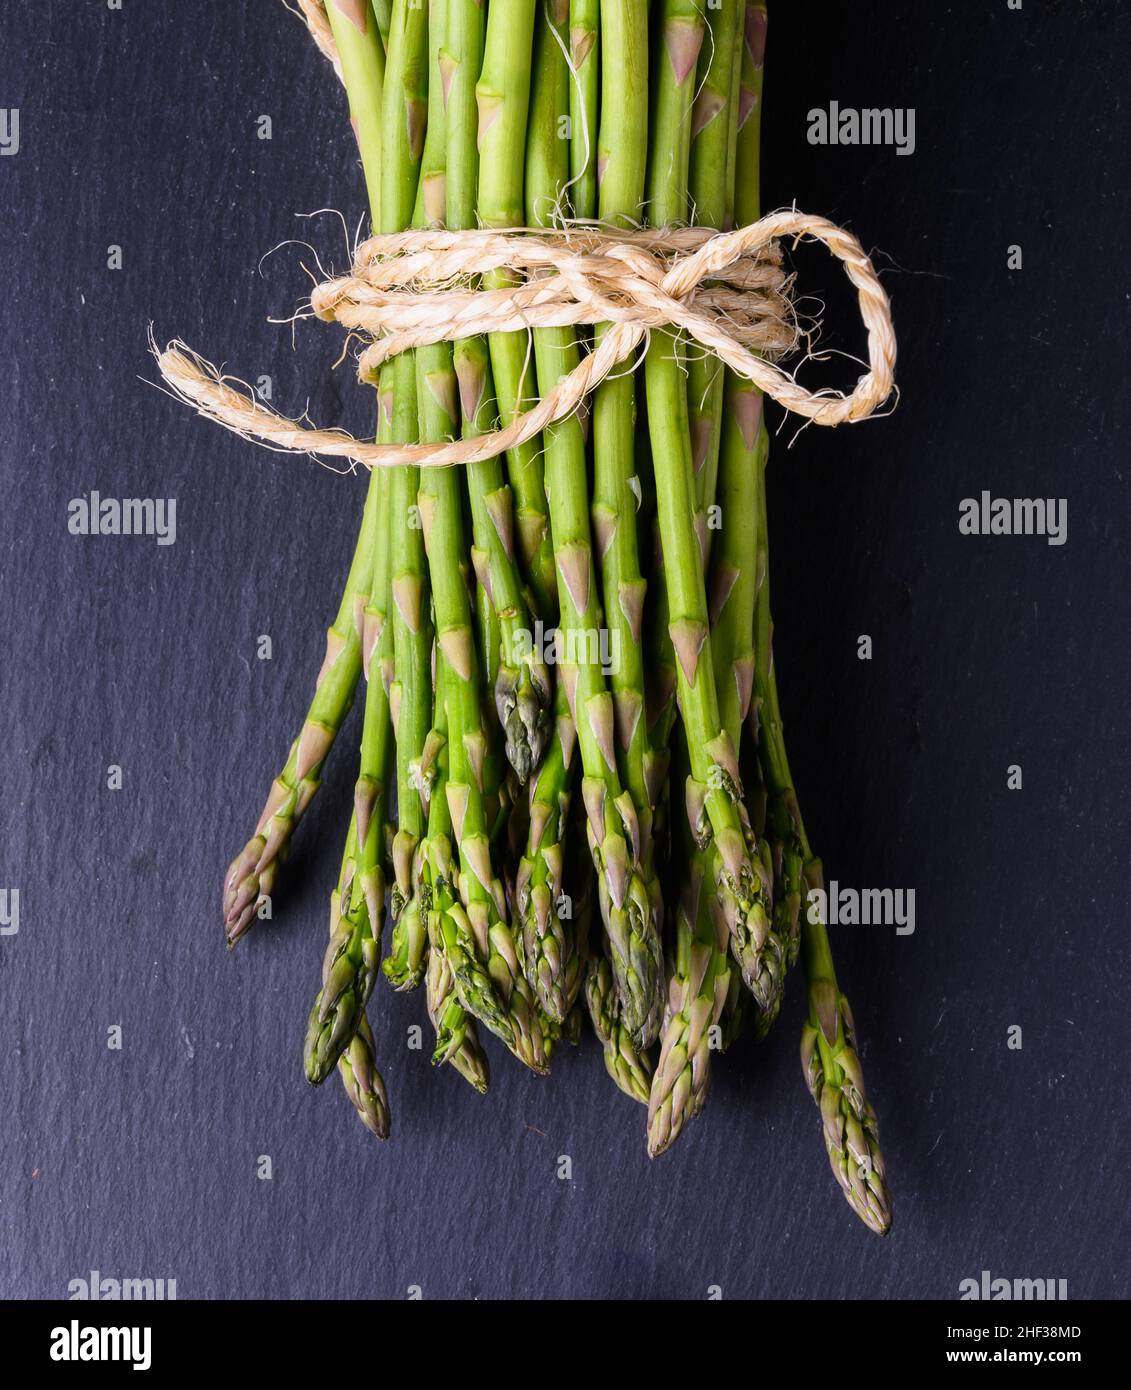 Fresh green asparagus tied with a string on a slate and rustic wooden table  Stock Photo